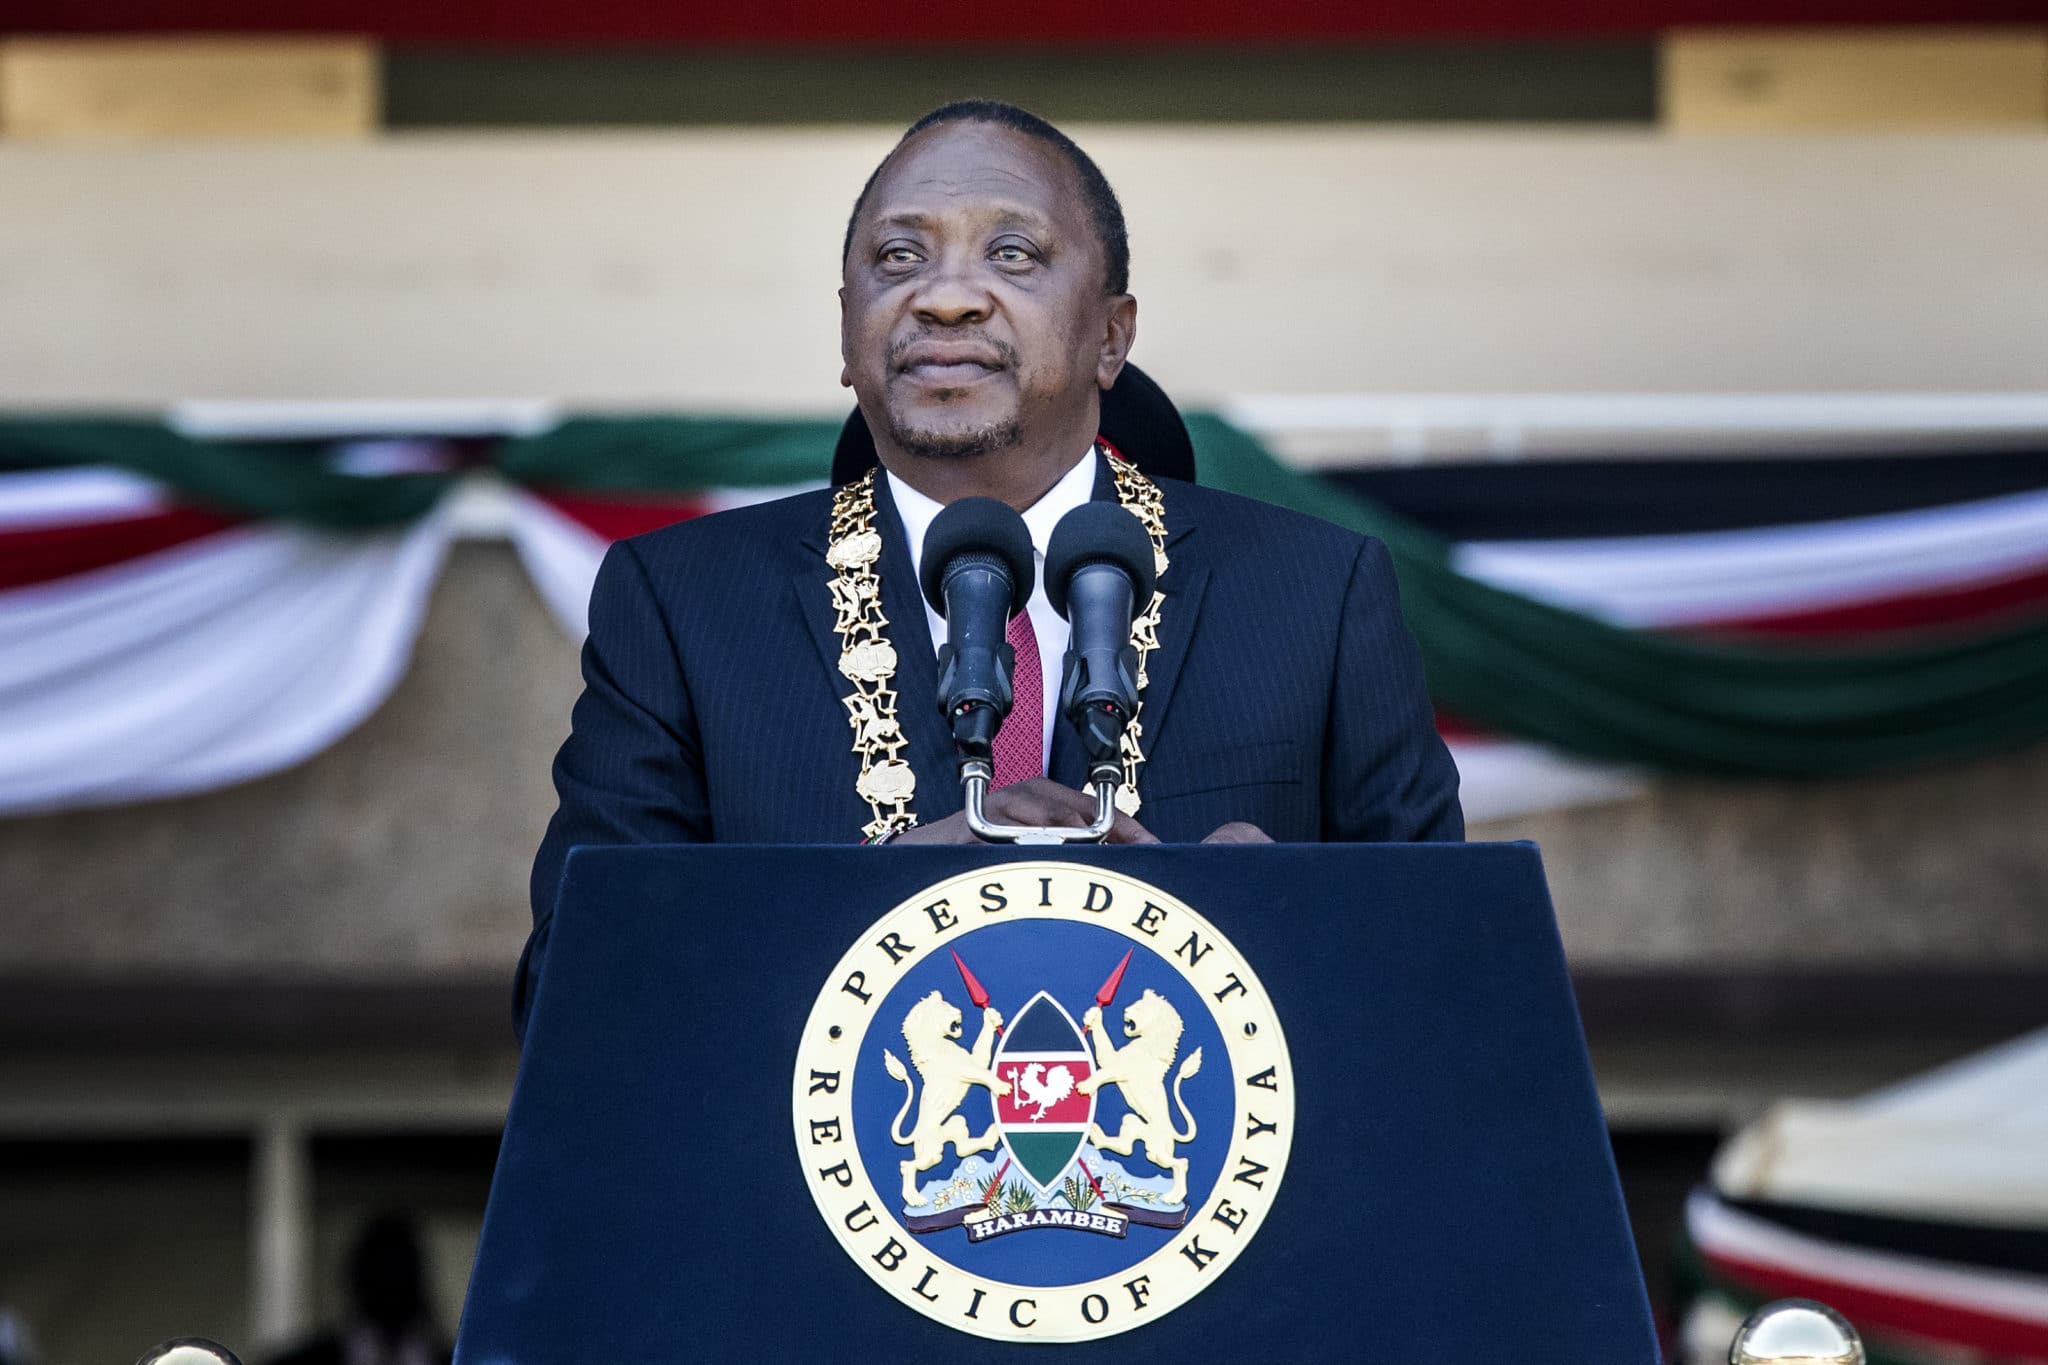 President Uhuru Kenyatta says Small-Scale Fishers are Key to Fighting Global Hunger and Poverty